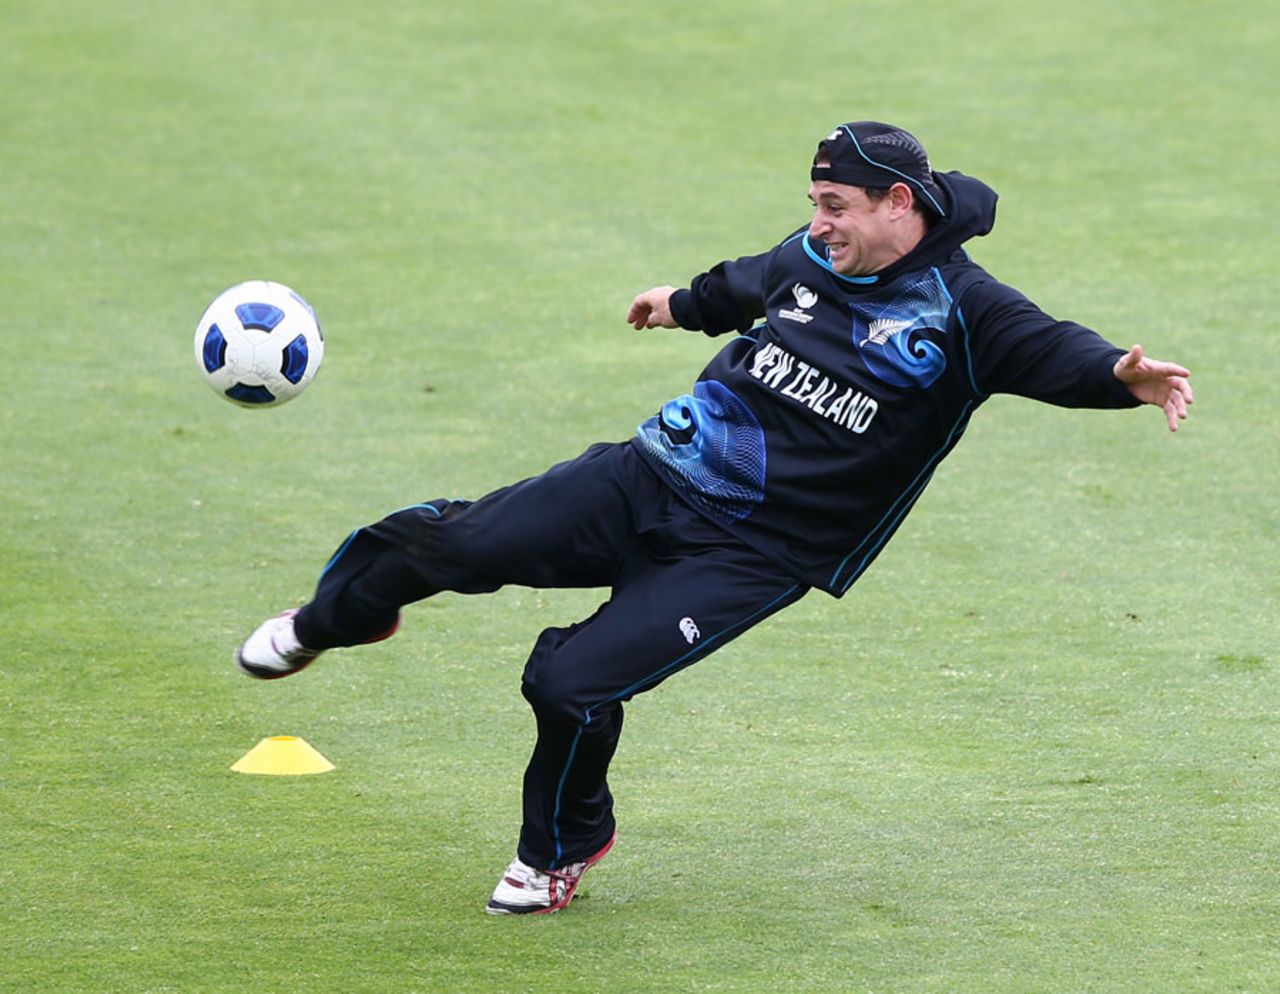 Nathan McCullum has a go in a game of football, Cardiff, June 15, 2013